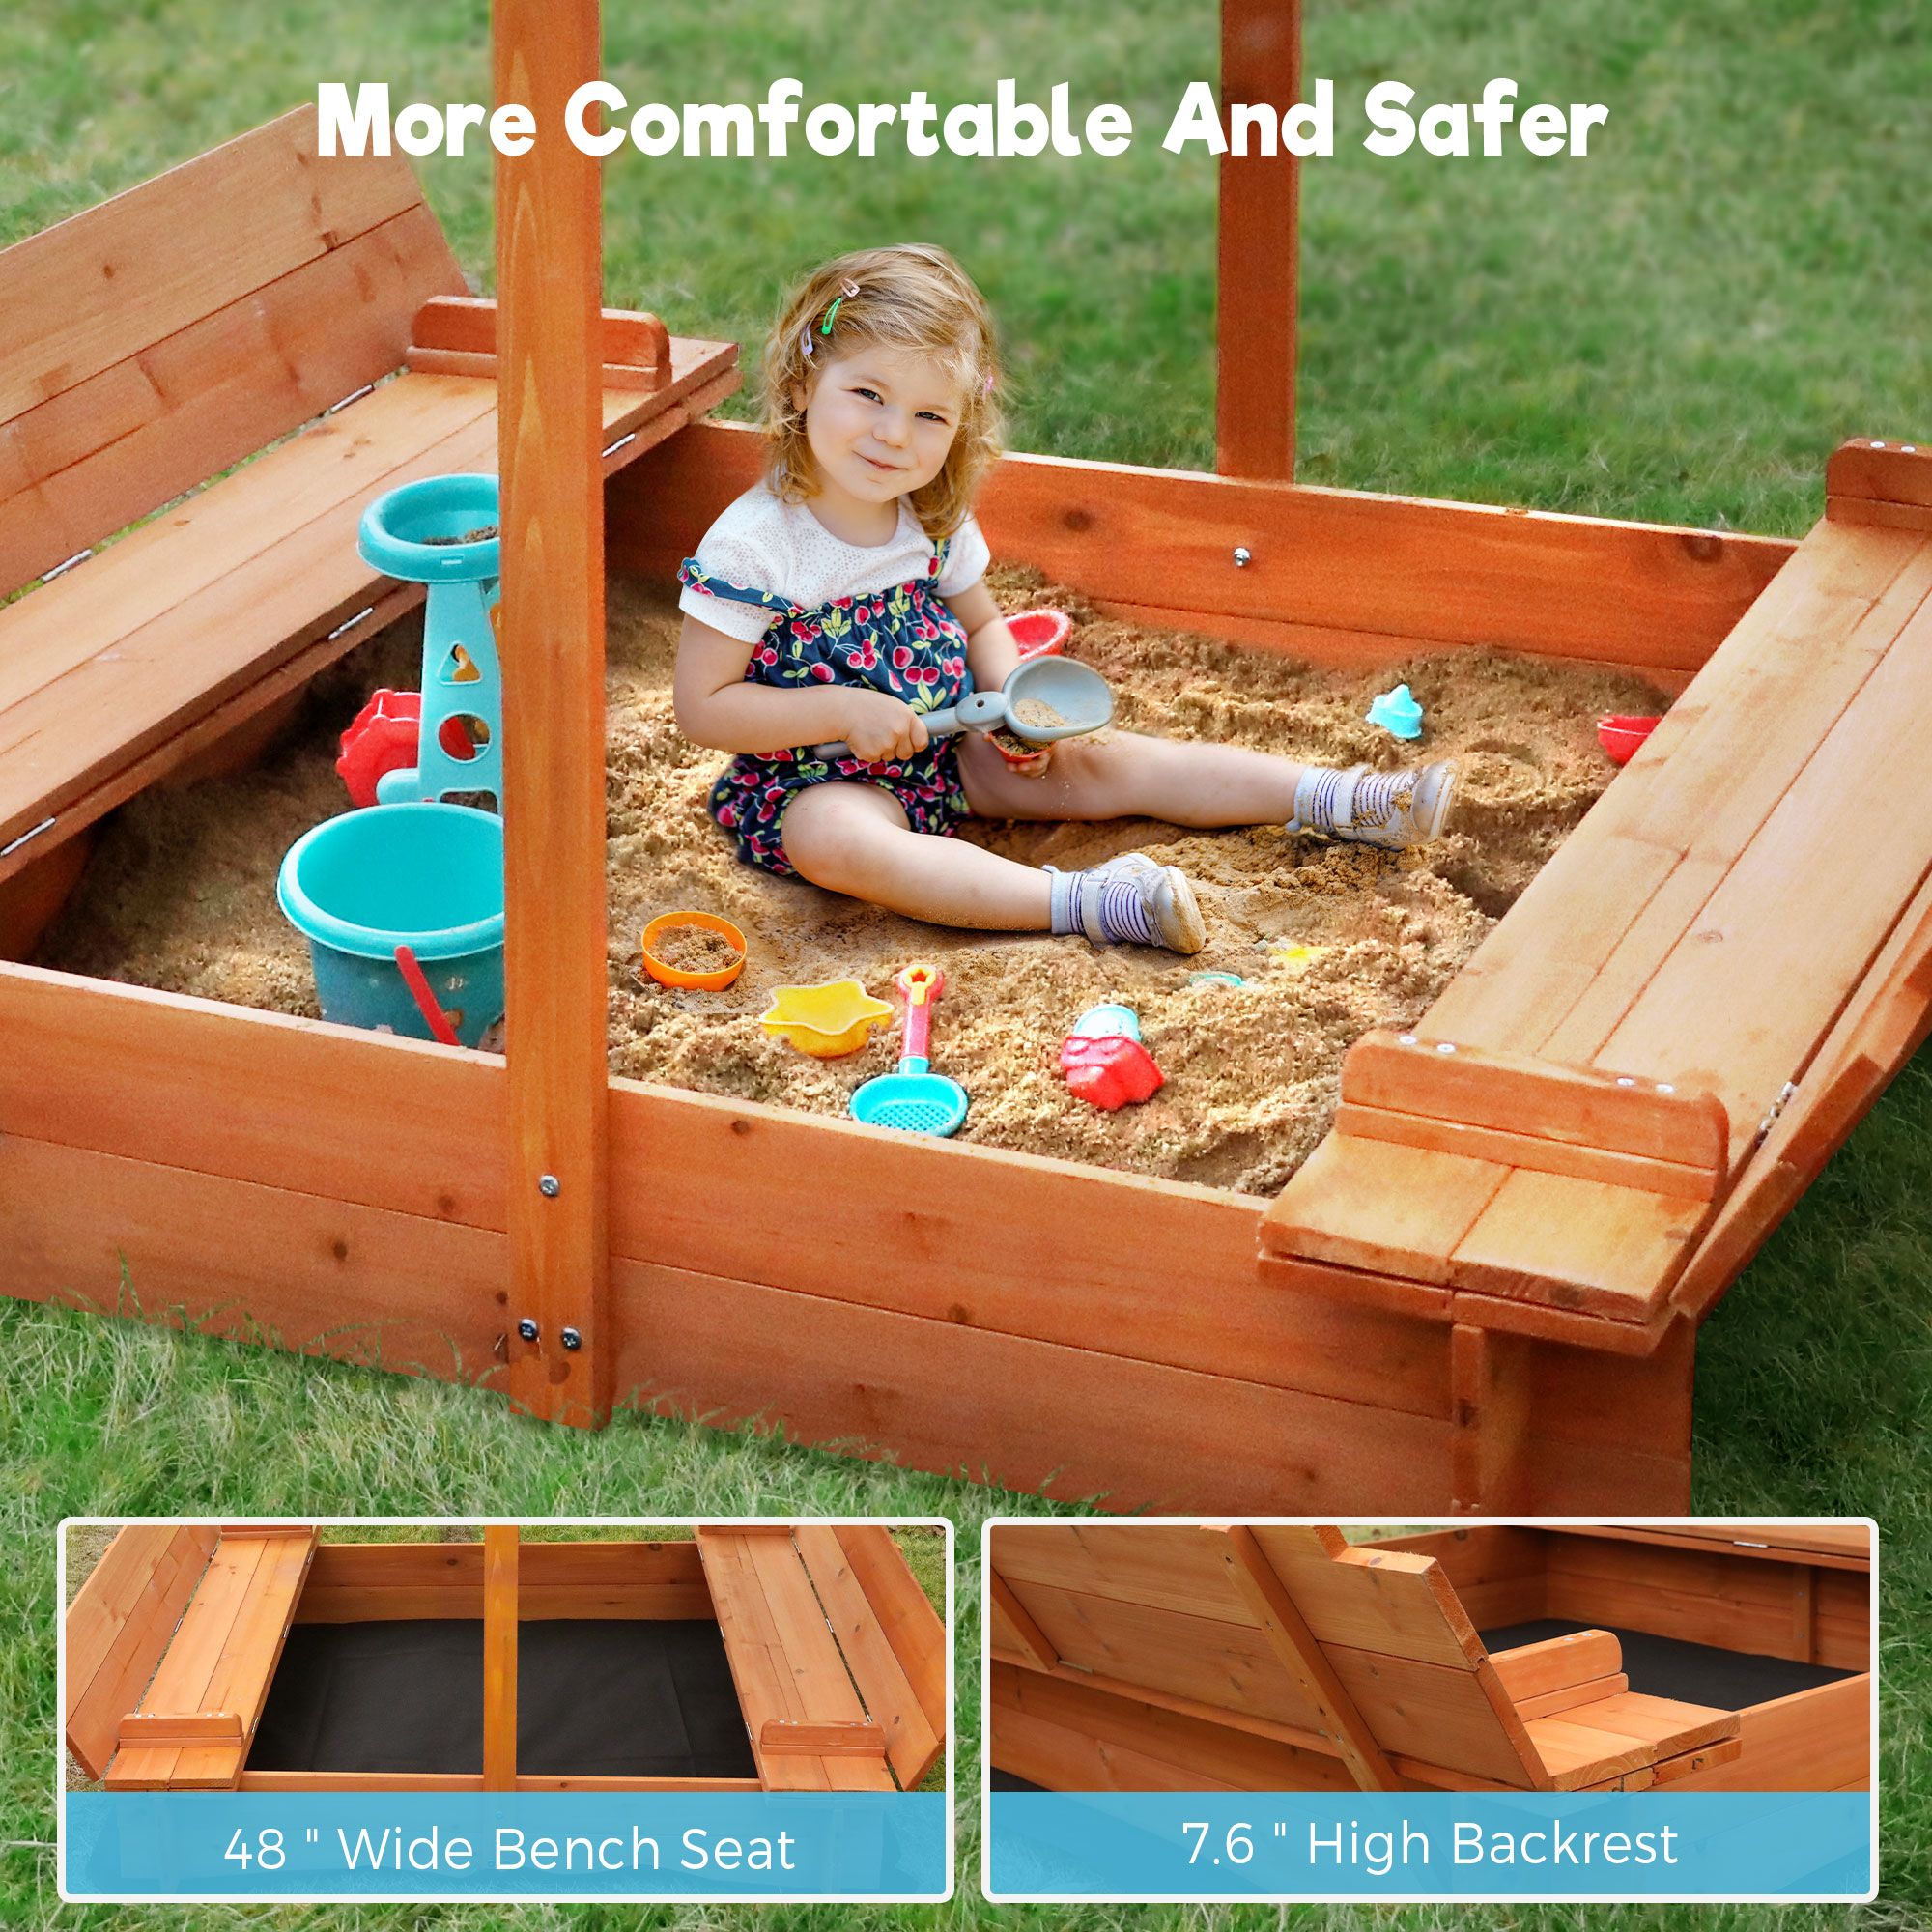 FUNTOK Wooden Sandbox with Cover, 48x48"Sand Boxes for Kids w/ 2 Foldable Bench Seats & UV-Resistant Canopy, Children Outdoor Sandbox w/ Lid for Backyard Lawn - image 4 of 8